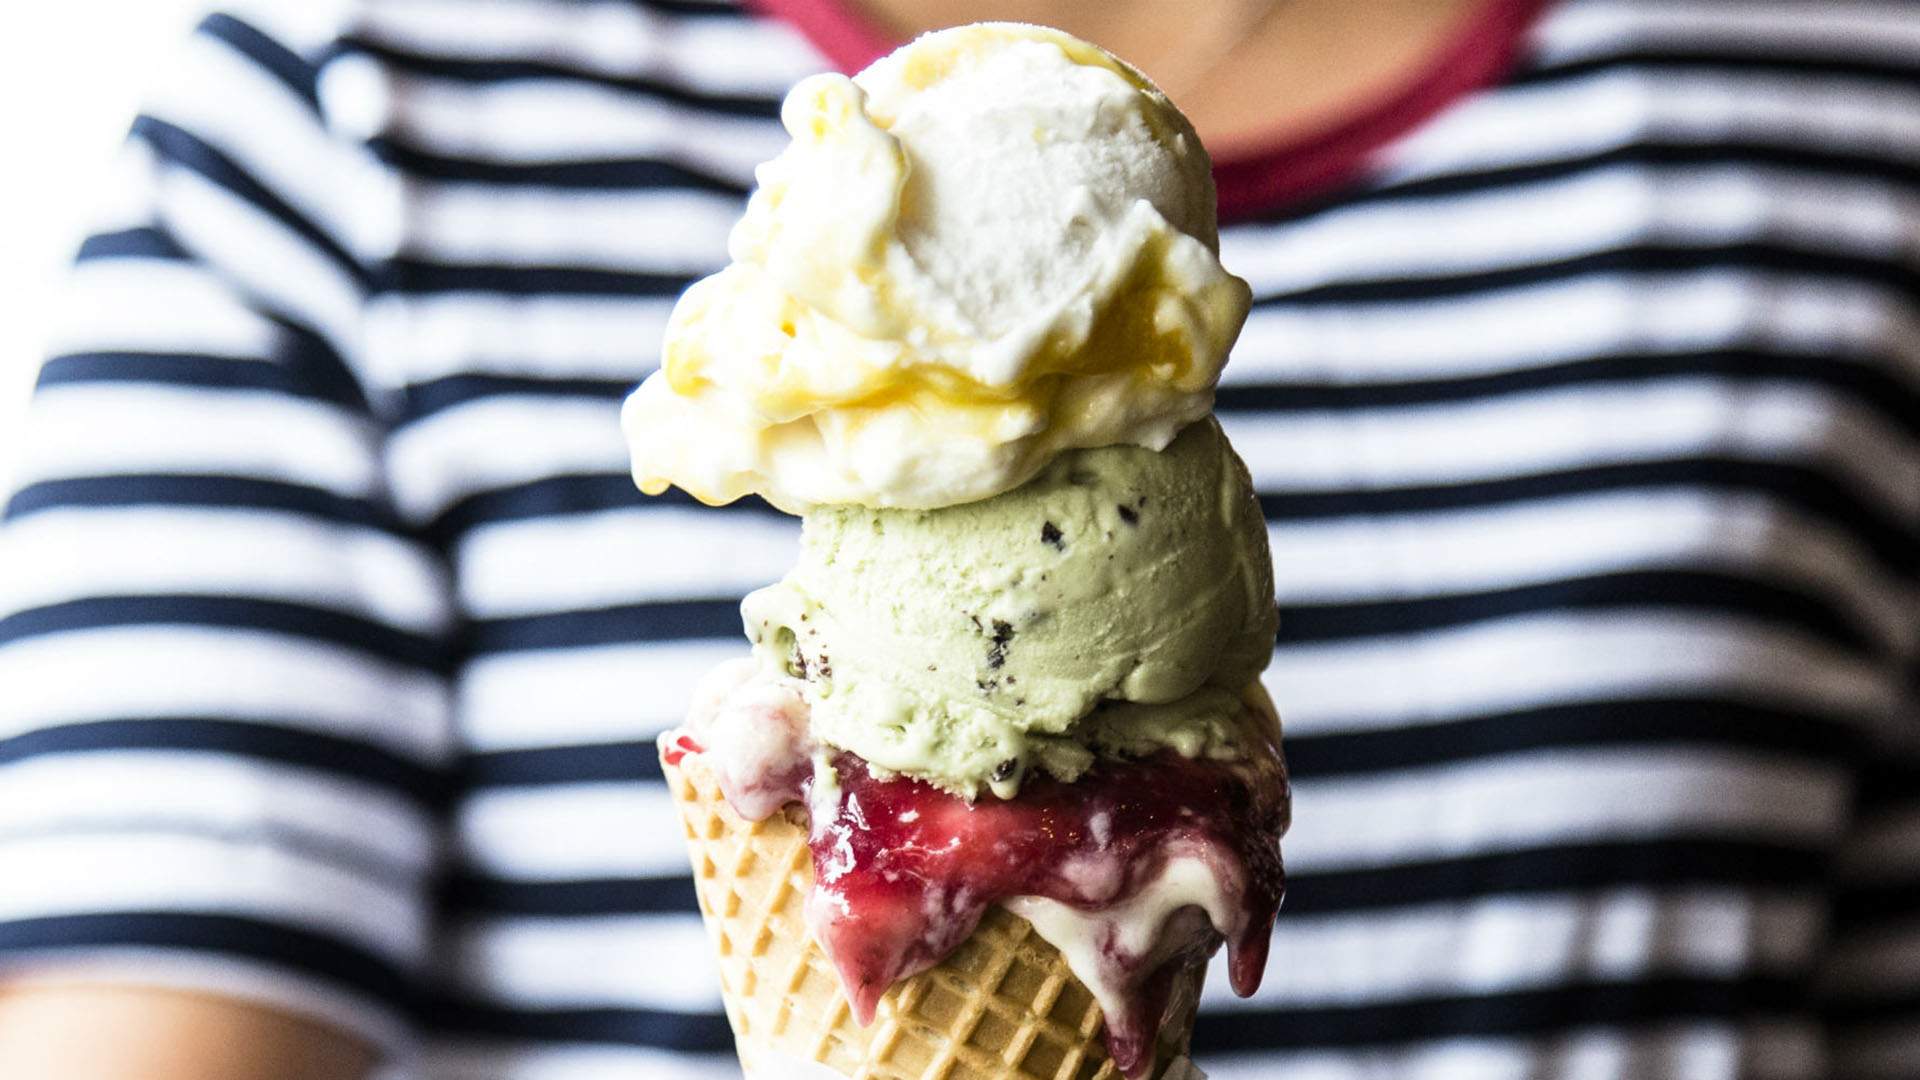 Uber Eats Is Giving Away $350,000 Worth of Messina Prizes If You Need Some More Gelato in Your Life